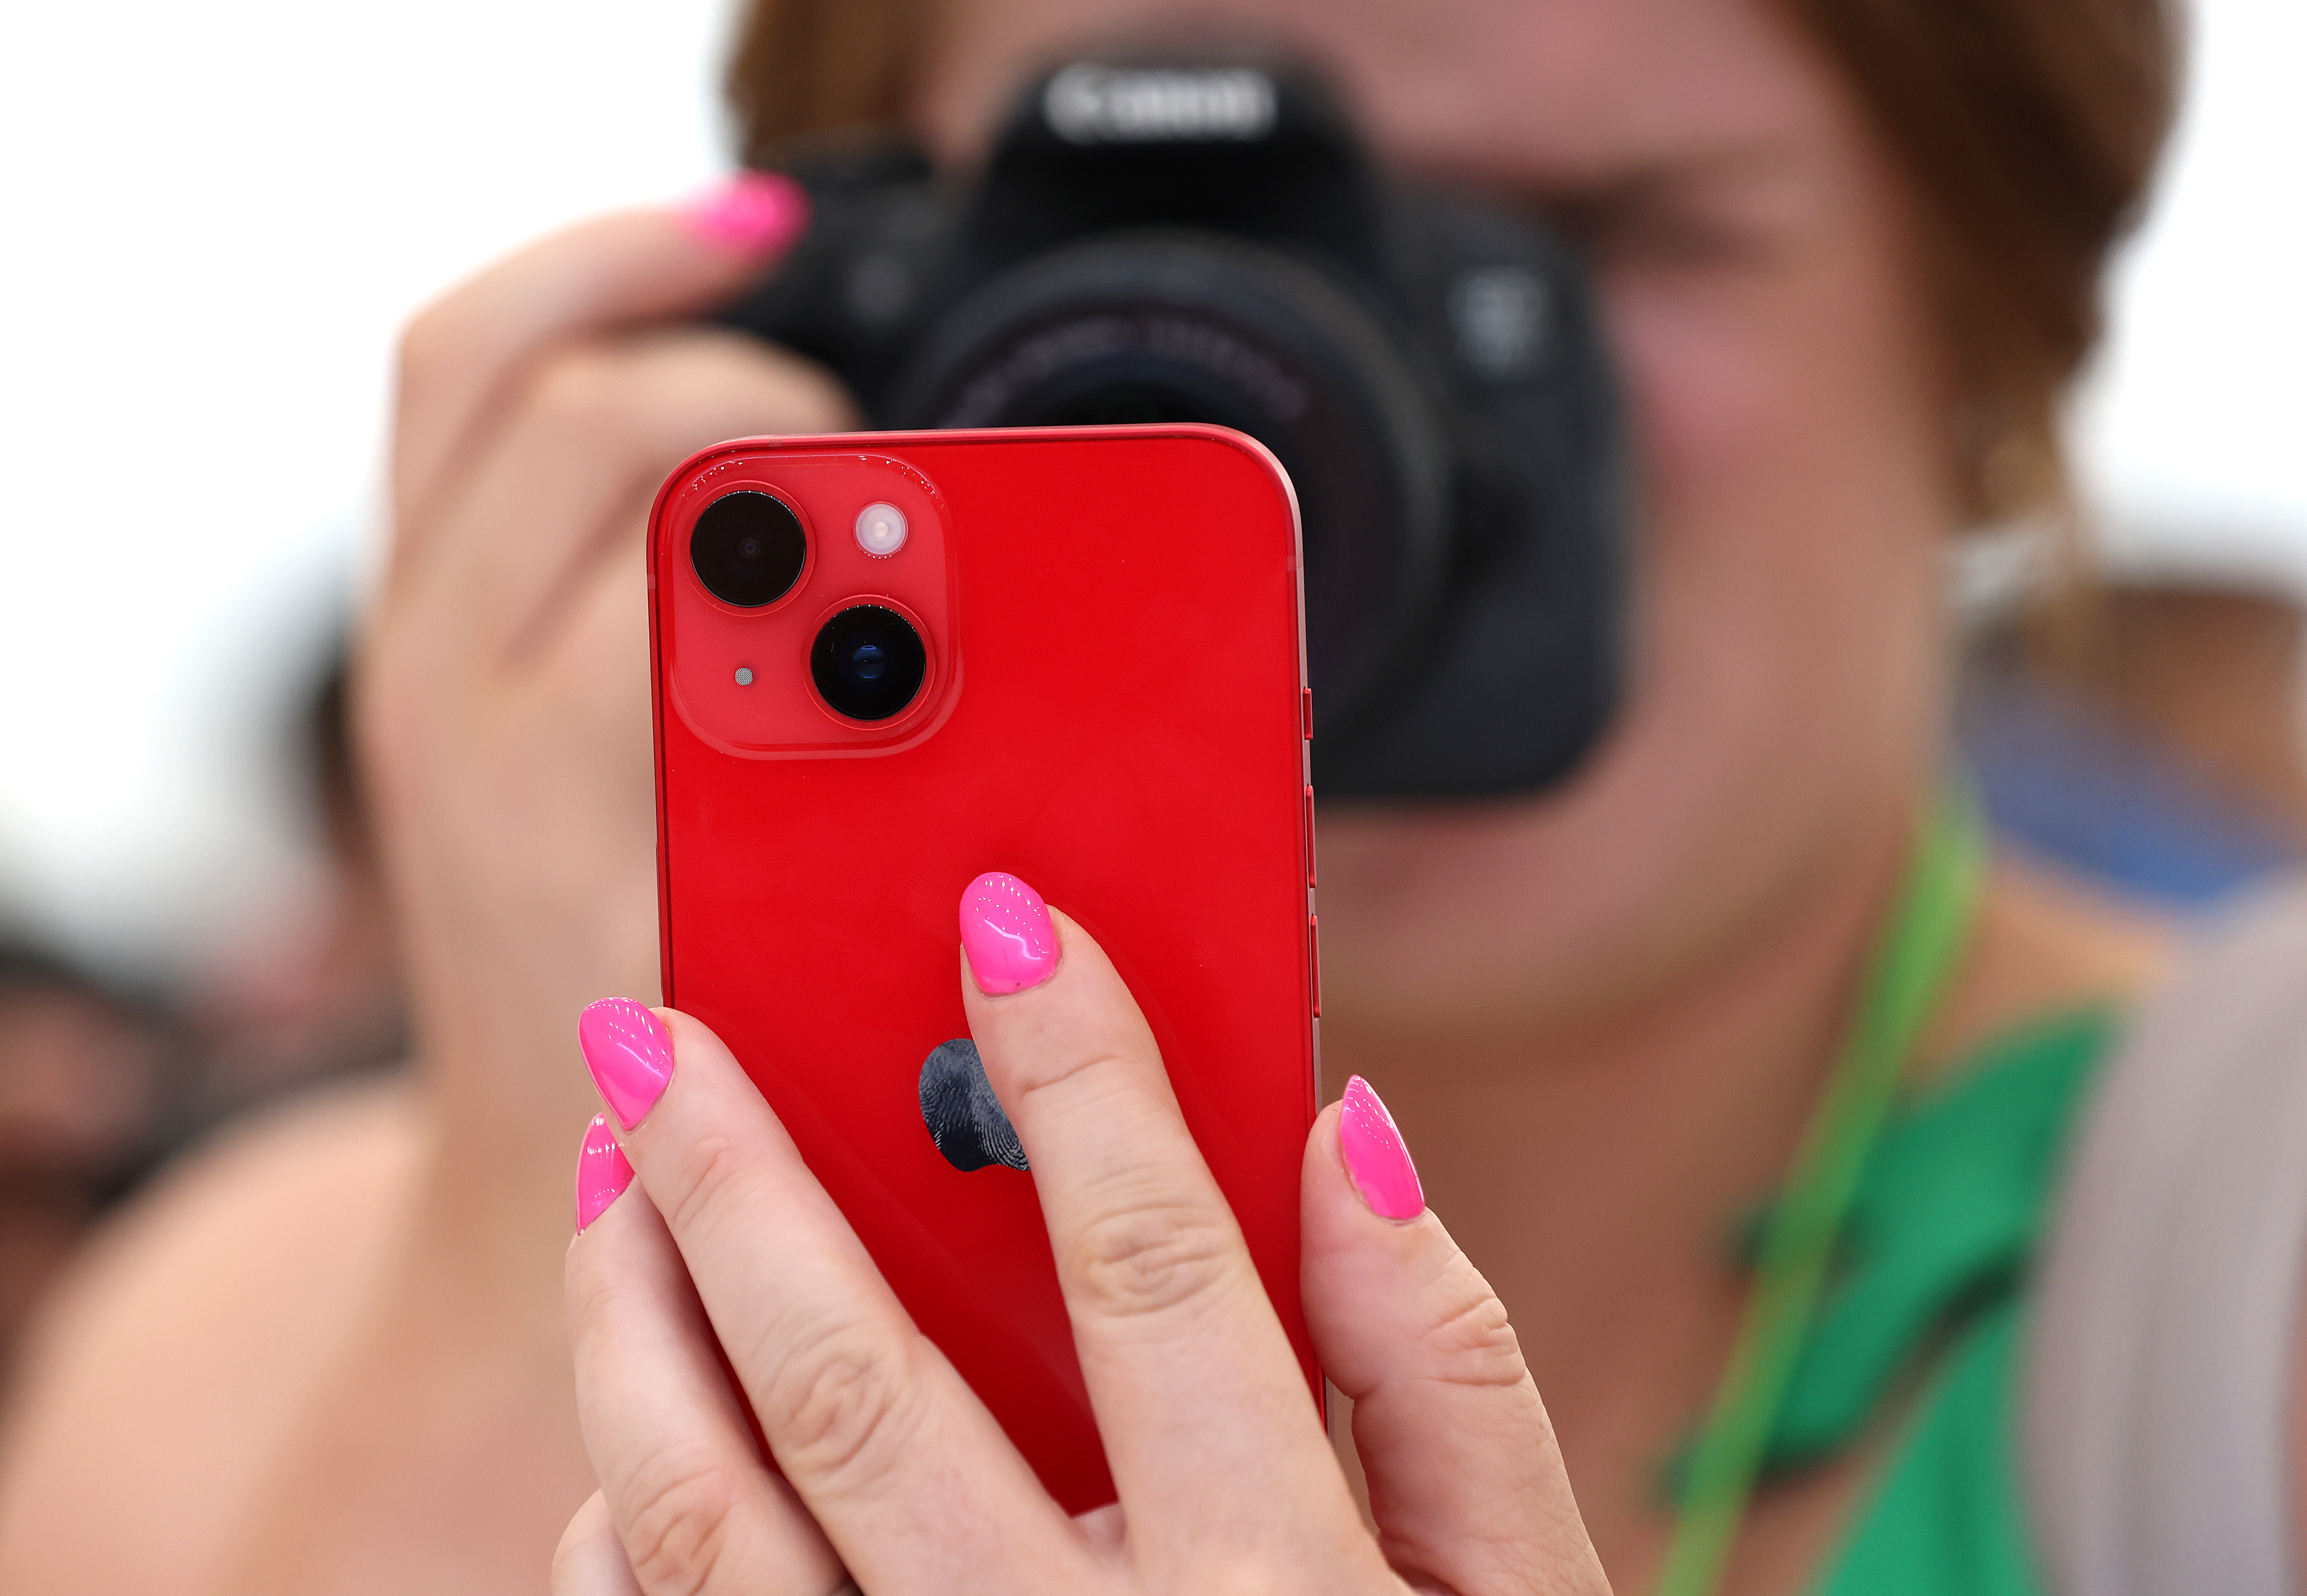 A person holds a traditional camera to their face while holding an iPhone in their hand.